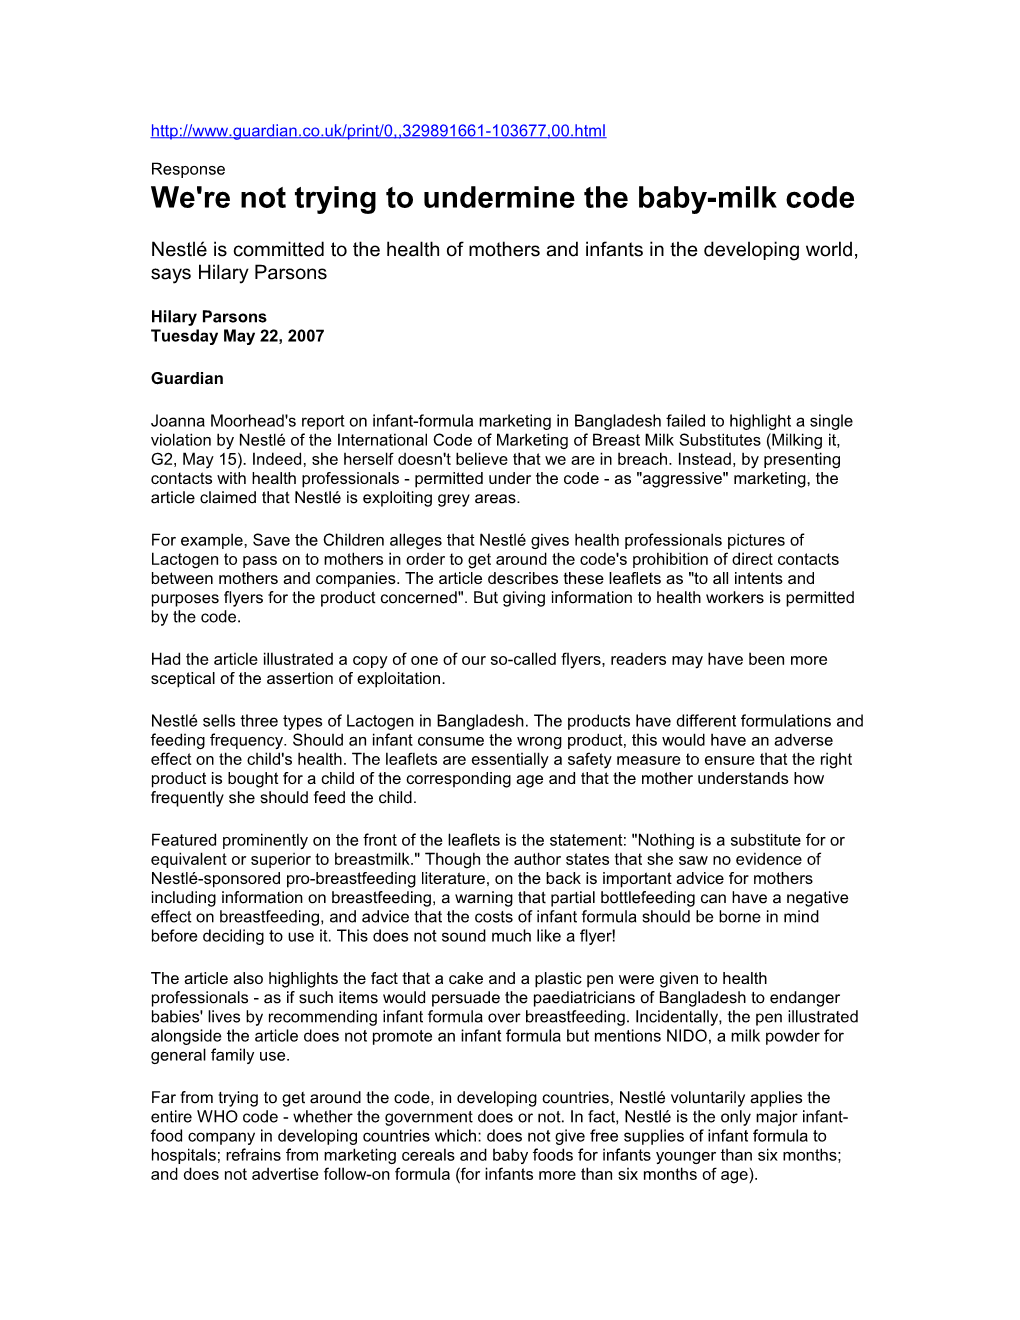 We're Not Trying to Undermine the Baby-Milk Code